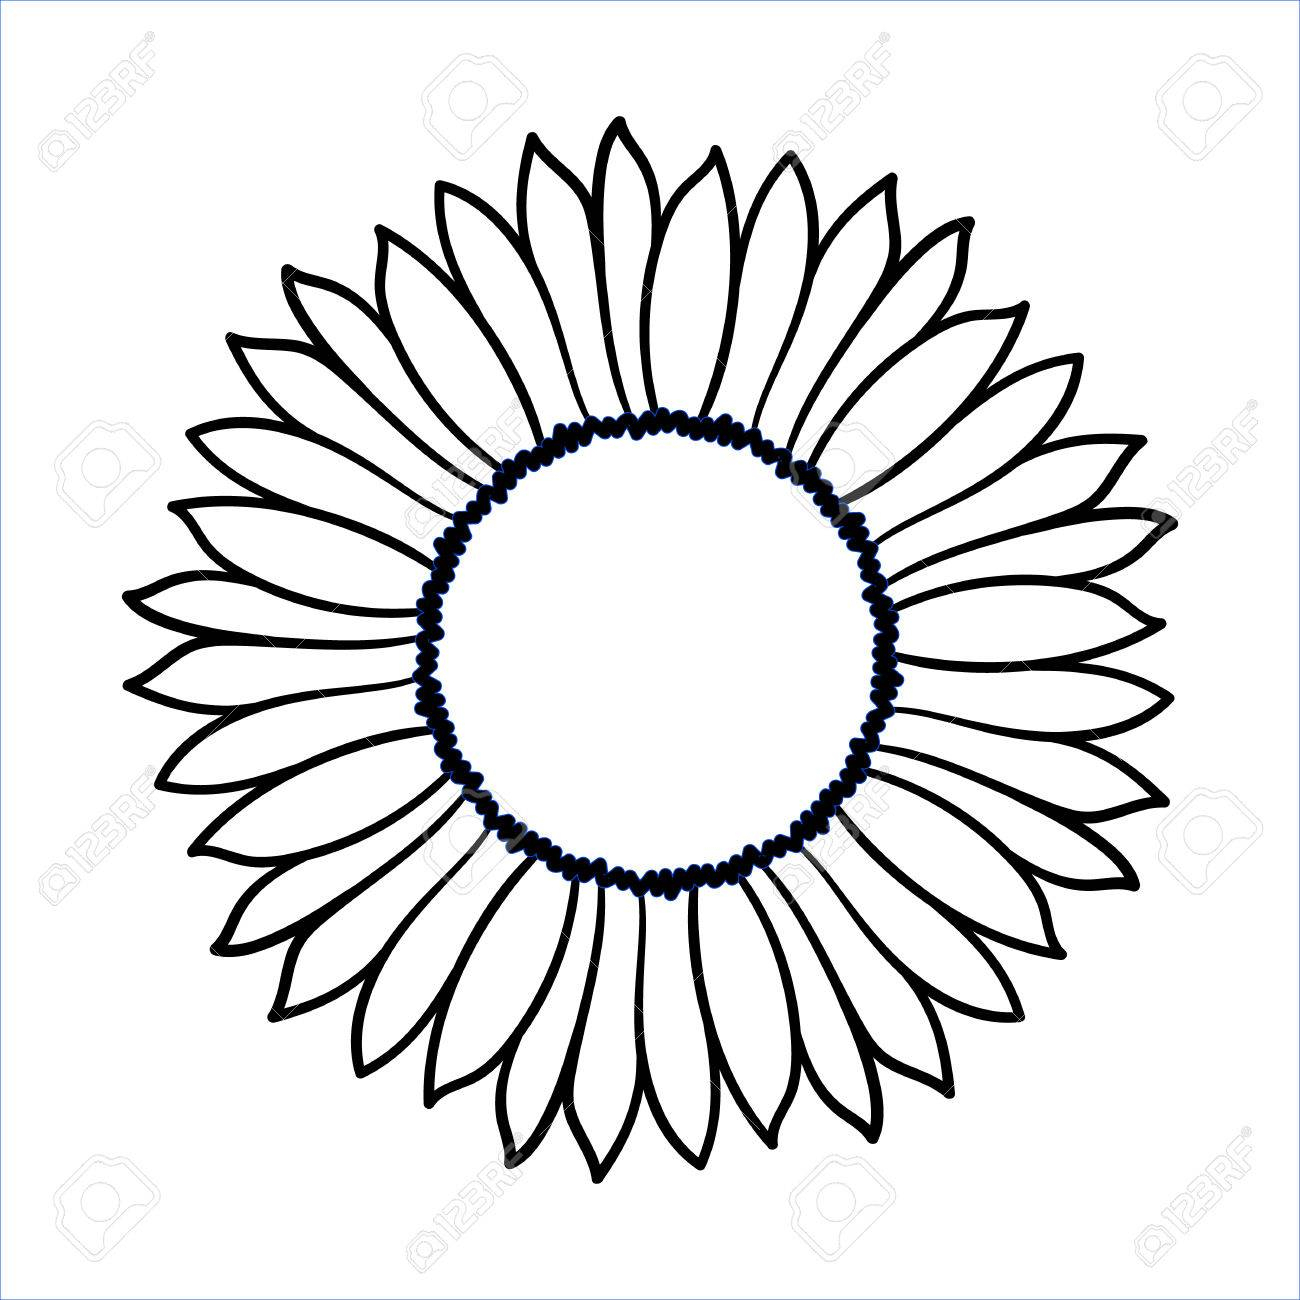 Sunflower Drawing Images Free